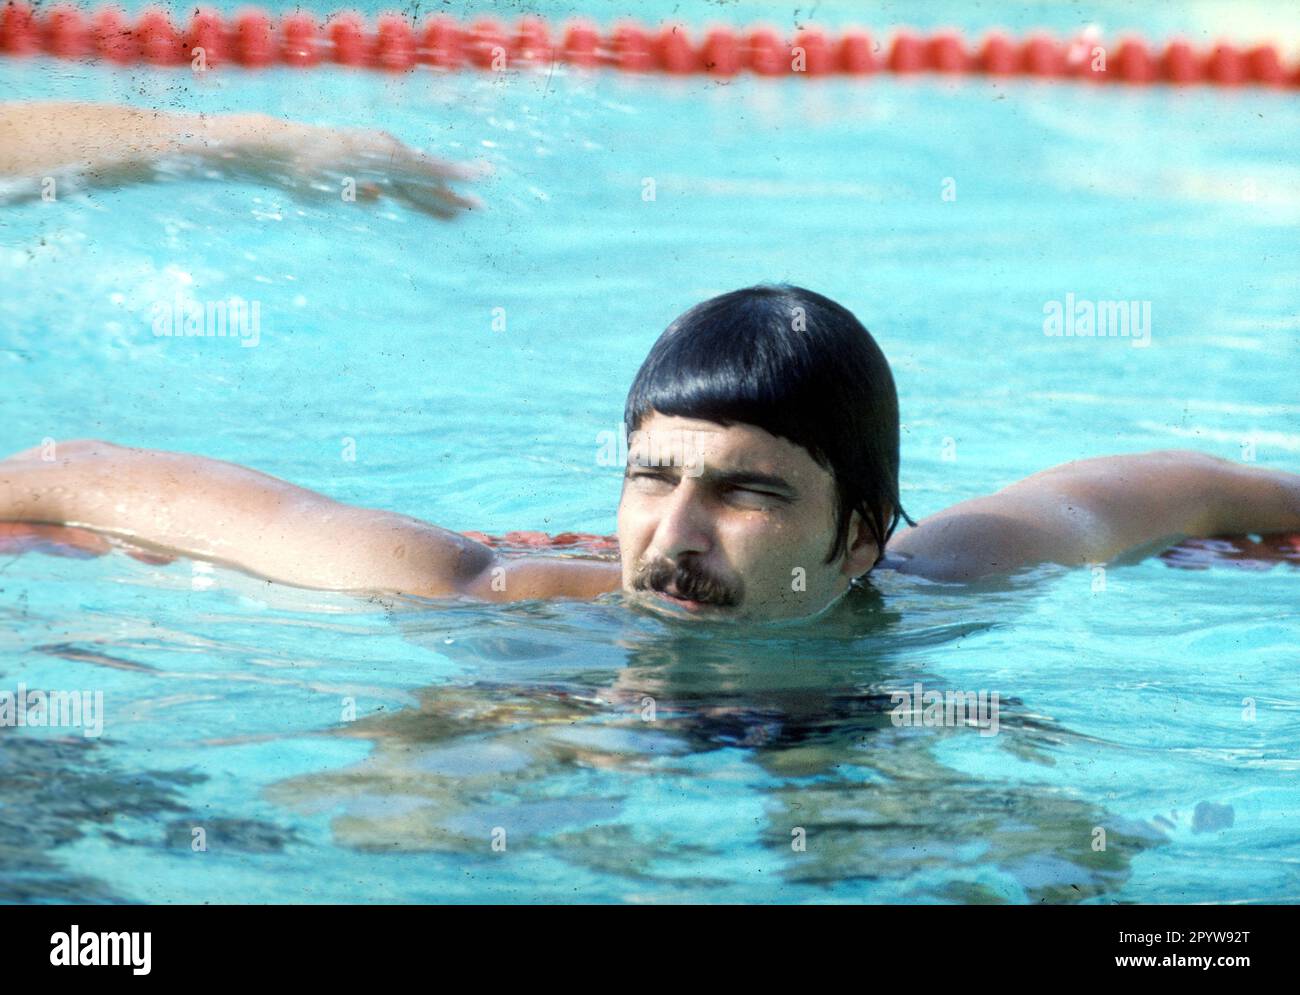 European Swimming Championships in Jönköping (Sweden) 1977 / The seven-time Olympic champion from Munich 1972, Mark Spitz (USA), did not miss the opportunity to test the pool 18.08.1977 [automated translation] Stock Photo